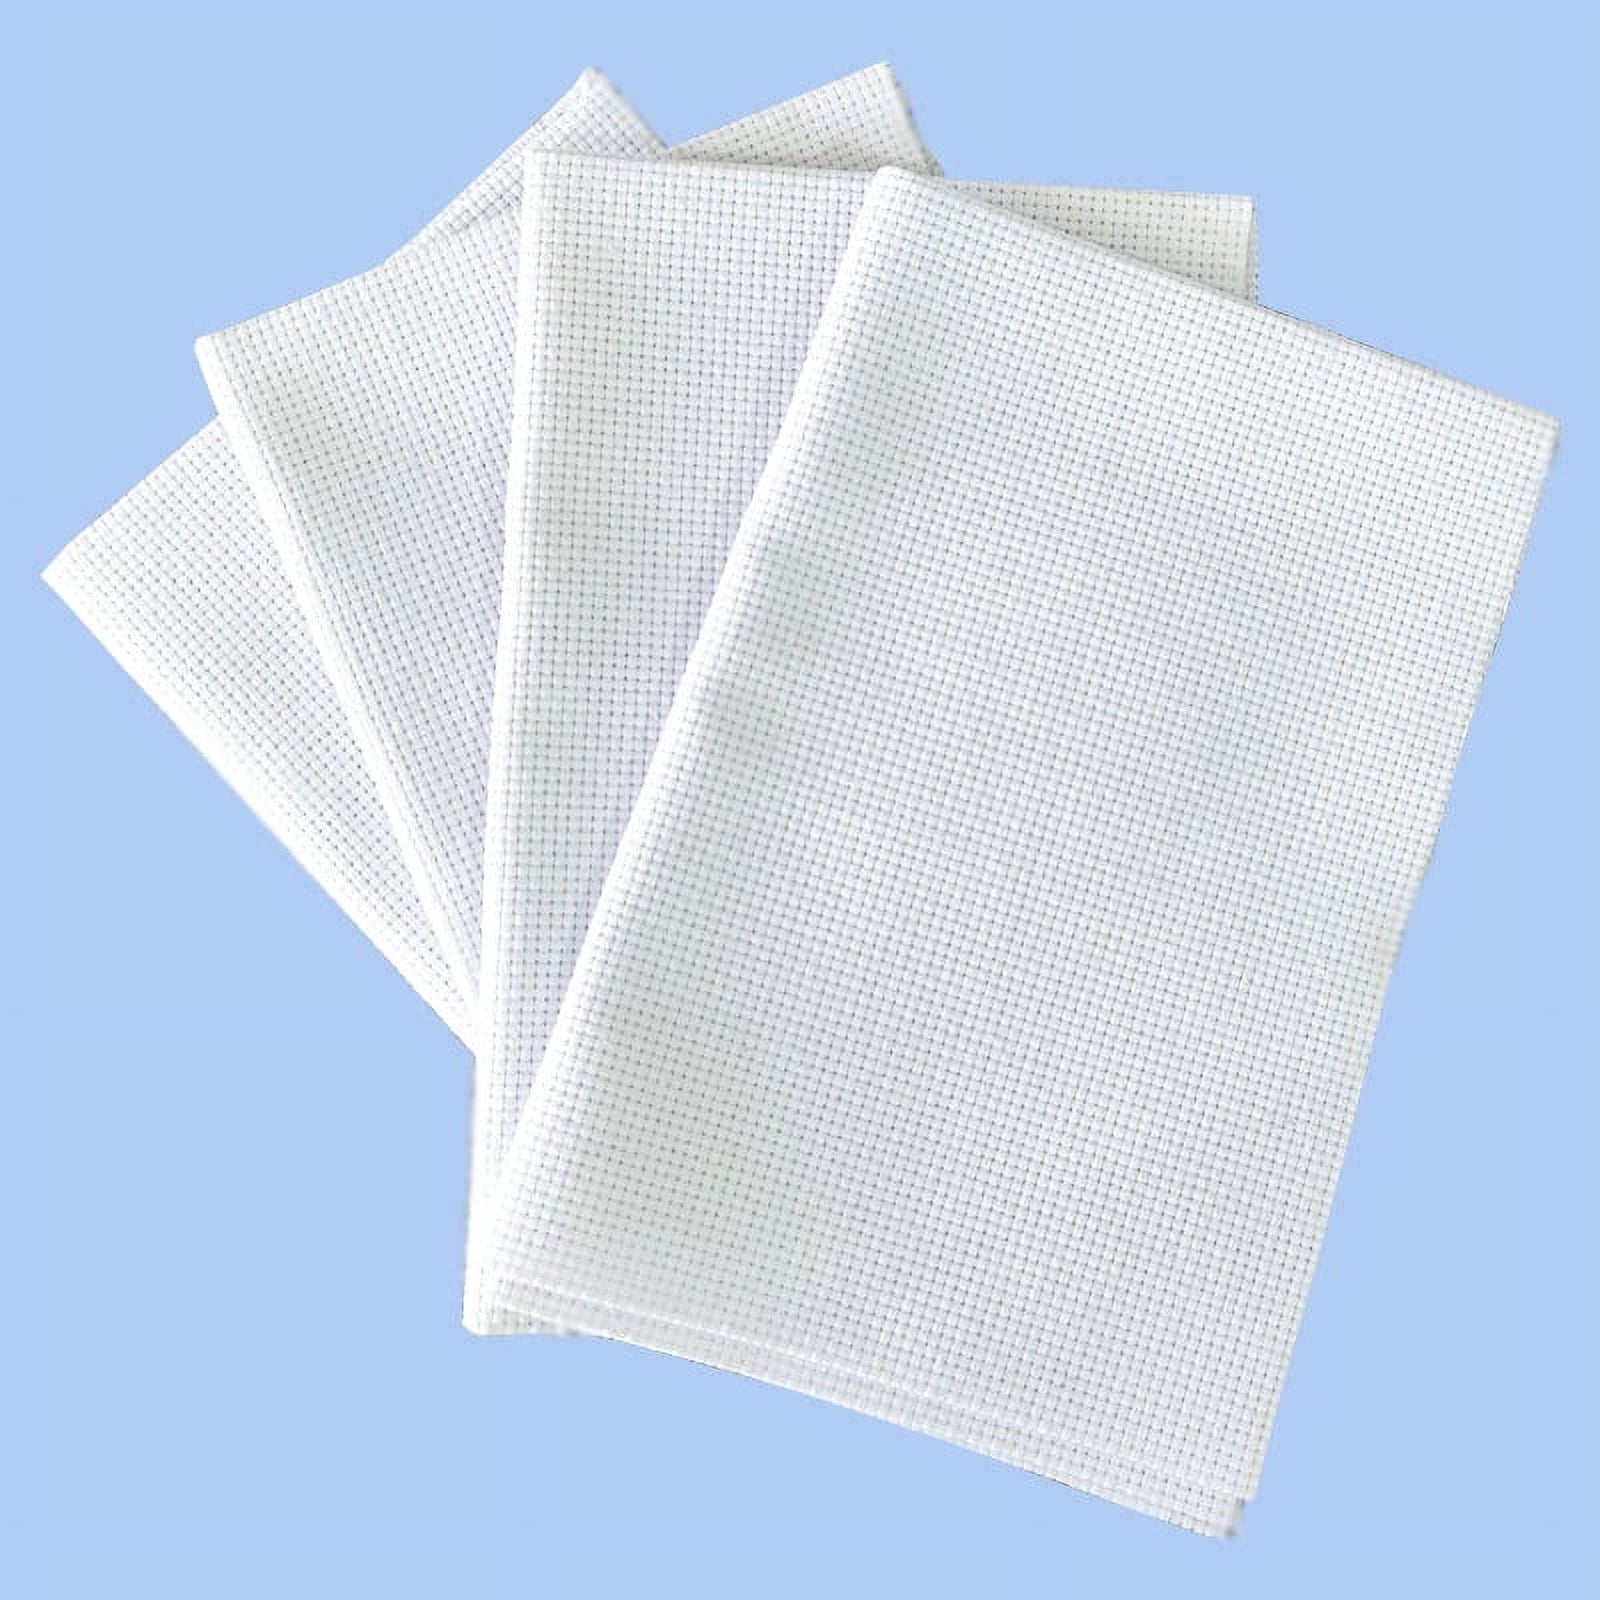 COHEALI 12 Pcs Cotton Fabric for Sewing Garment Fabric Embroidered Plain  Cloth White Aida Cloth Embroidery Cloth Beginner Upholstery Supplies DIY